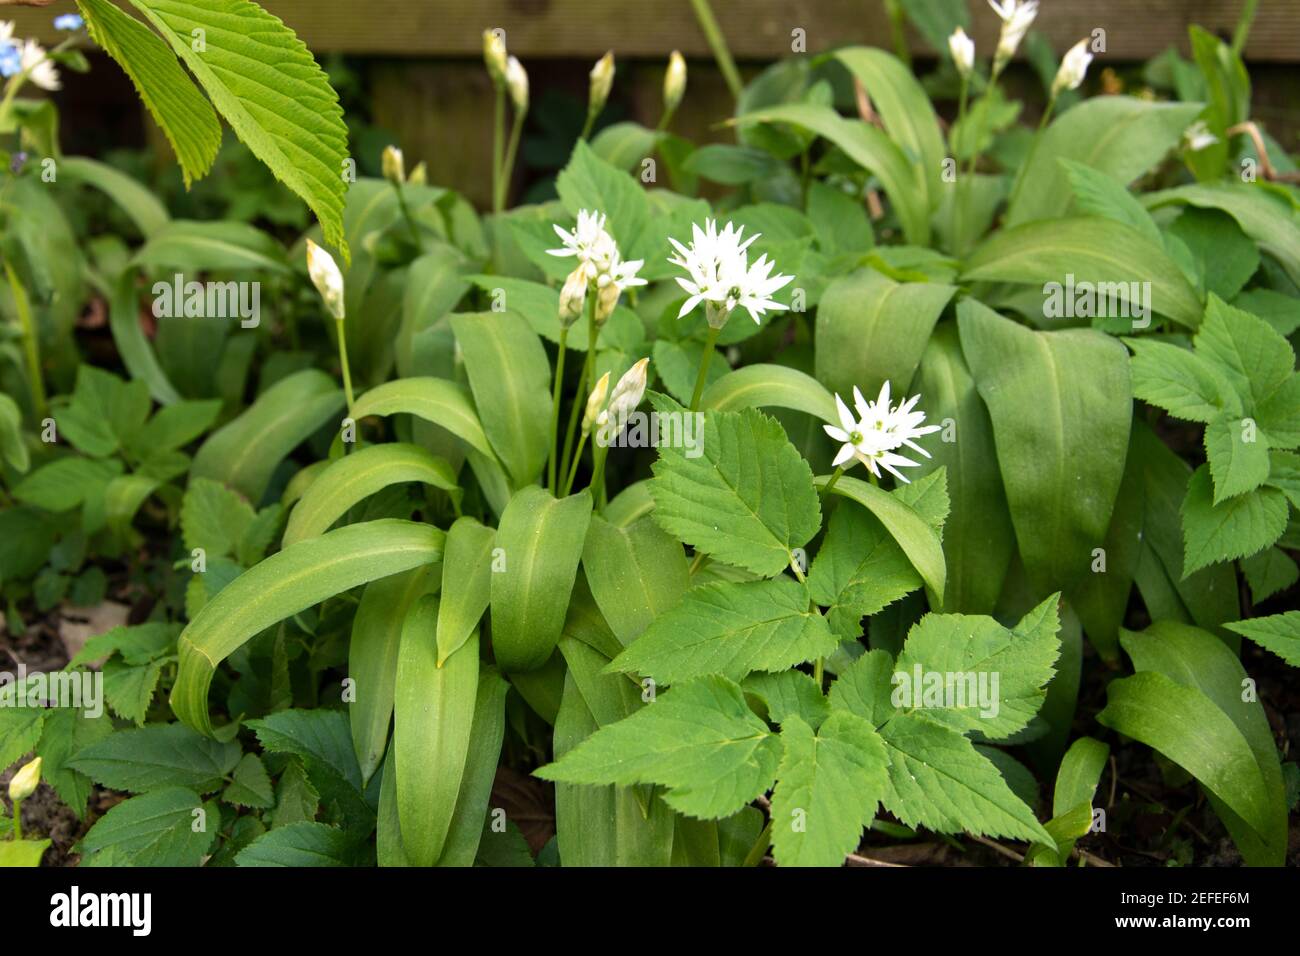 Wild garlic, Allium ursinum, is a valued wild vegetable and medicinal plant. It can also be grown in the garden. Stock Photo